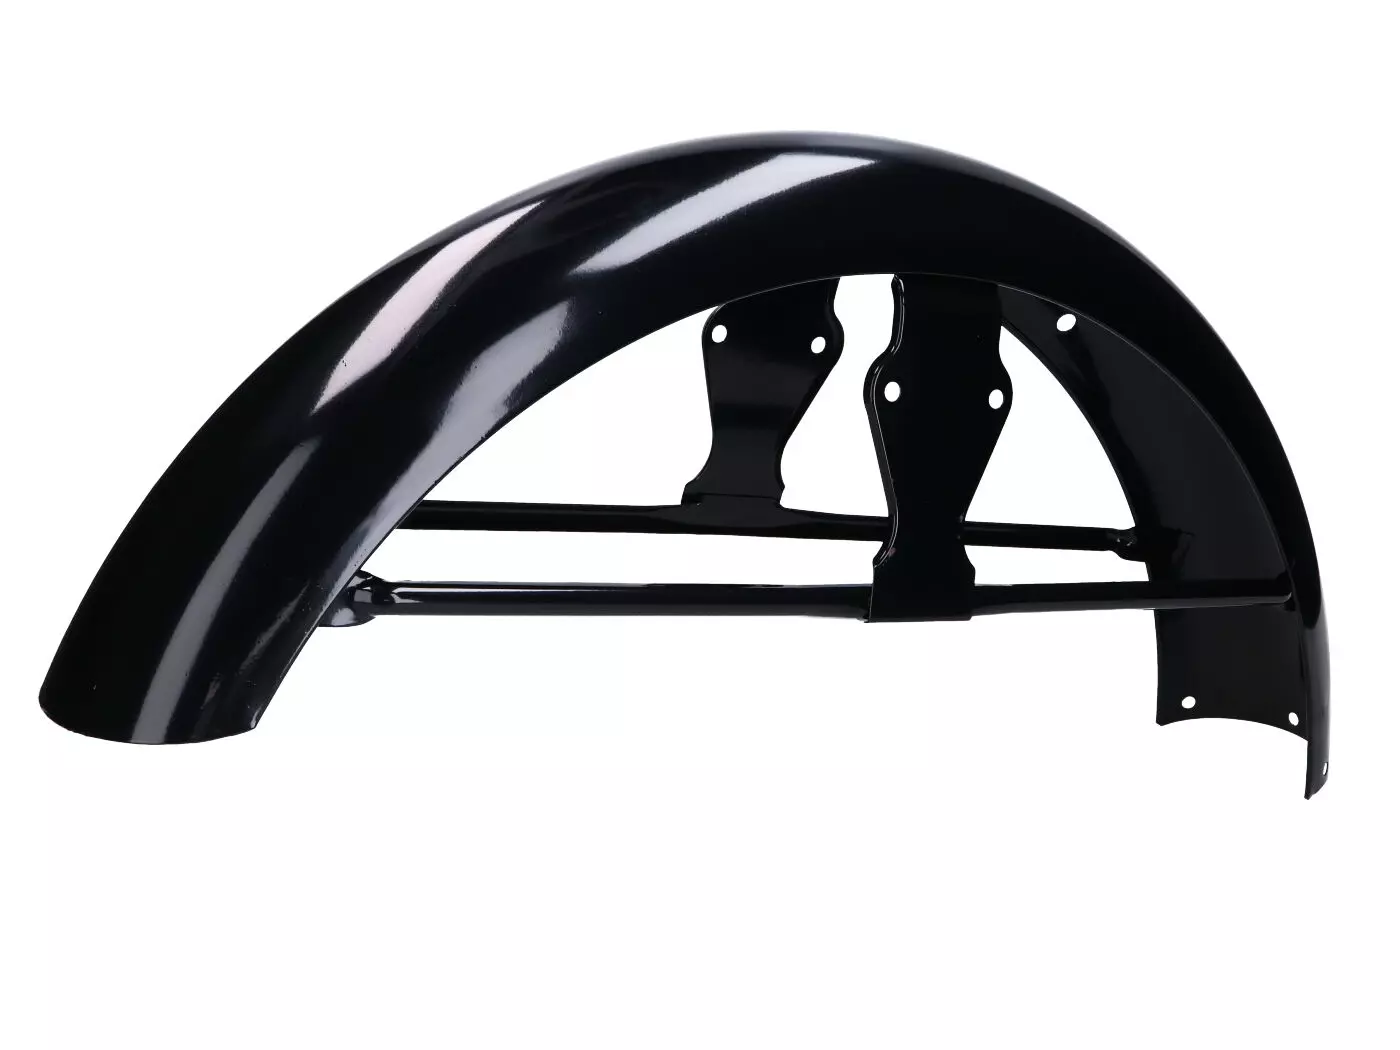 Front Mudguard / Fender With Strut, Black Primed For Simson S50, S51, S70